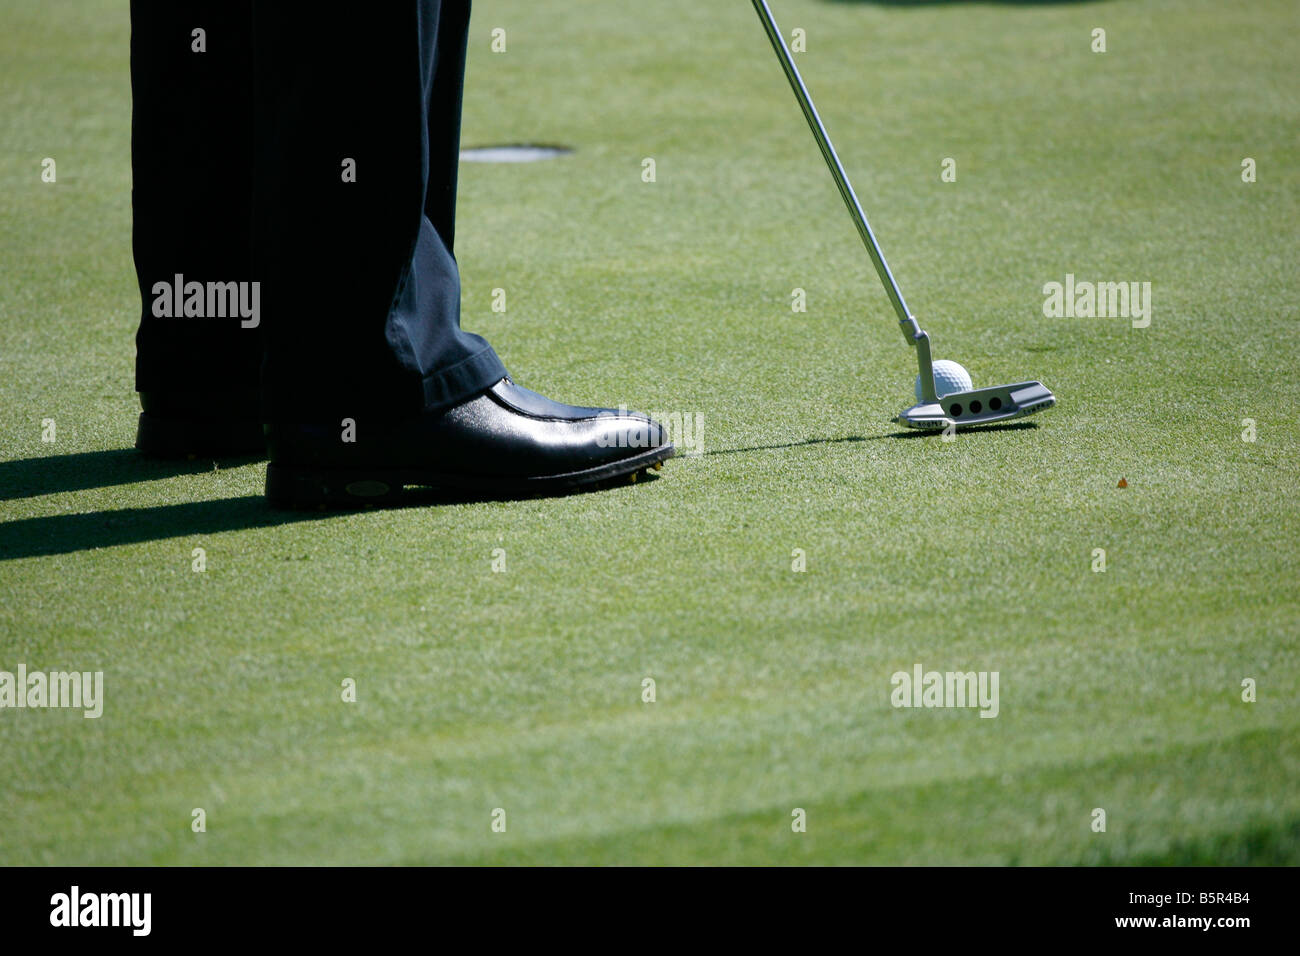 Close-up of a golfer's feet with a putter and ball. Stock Photo